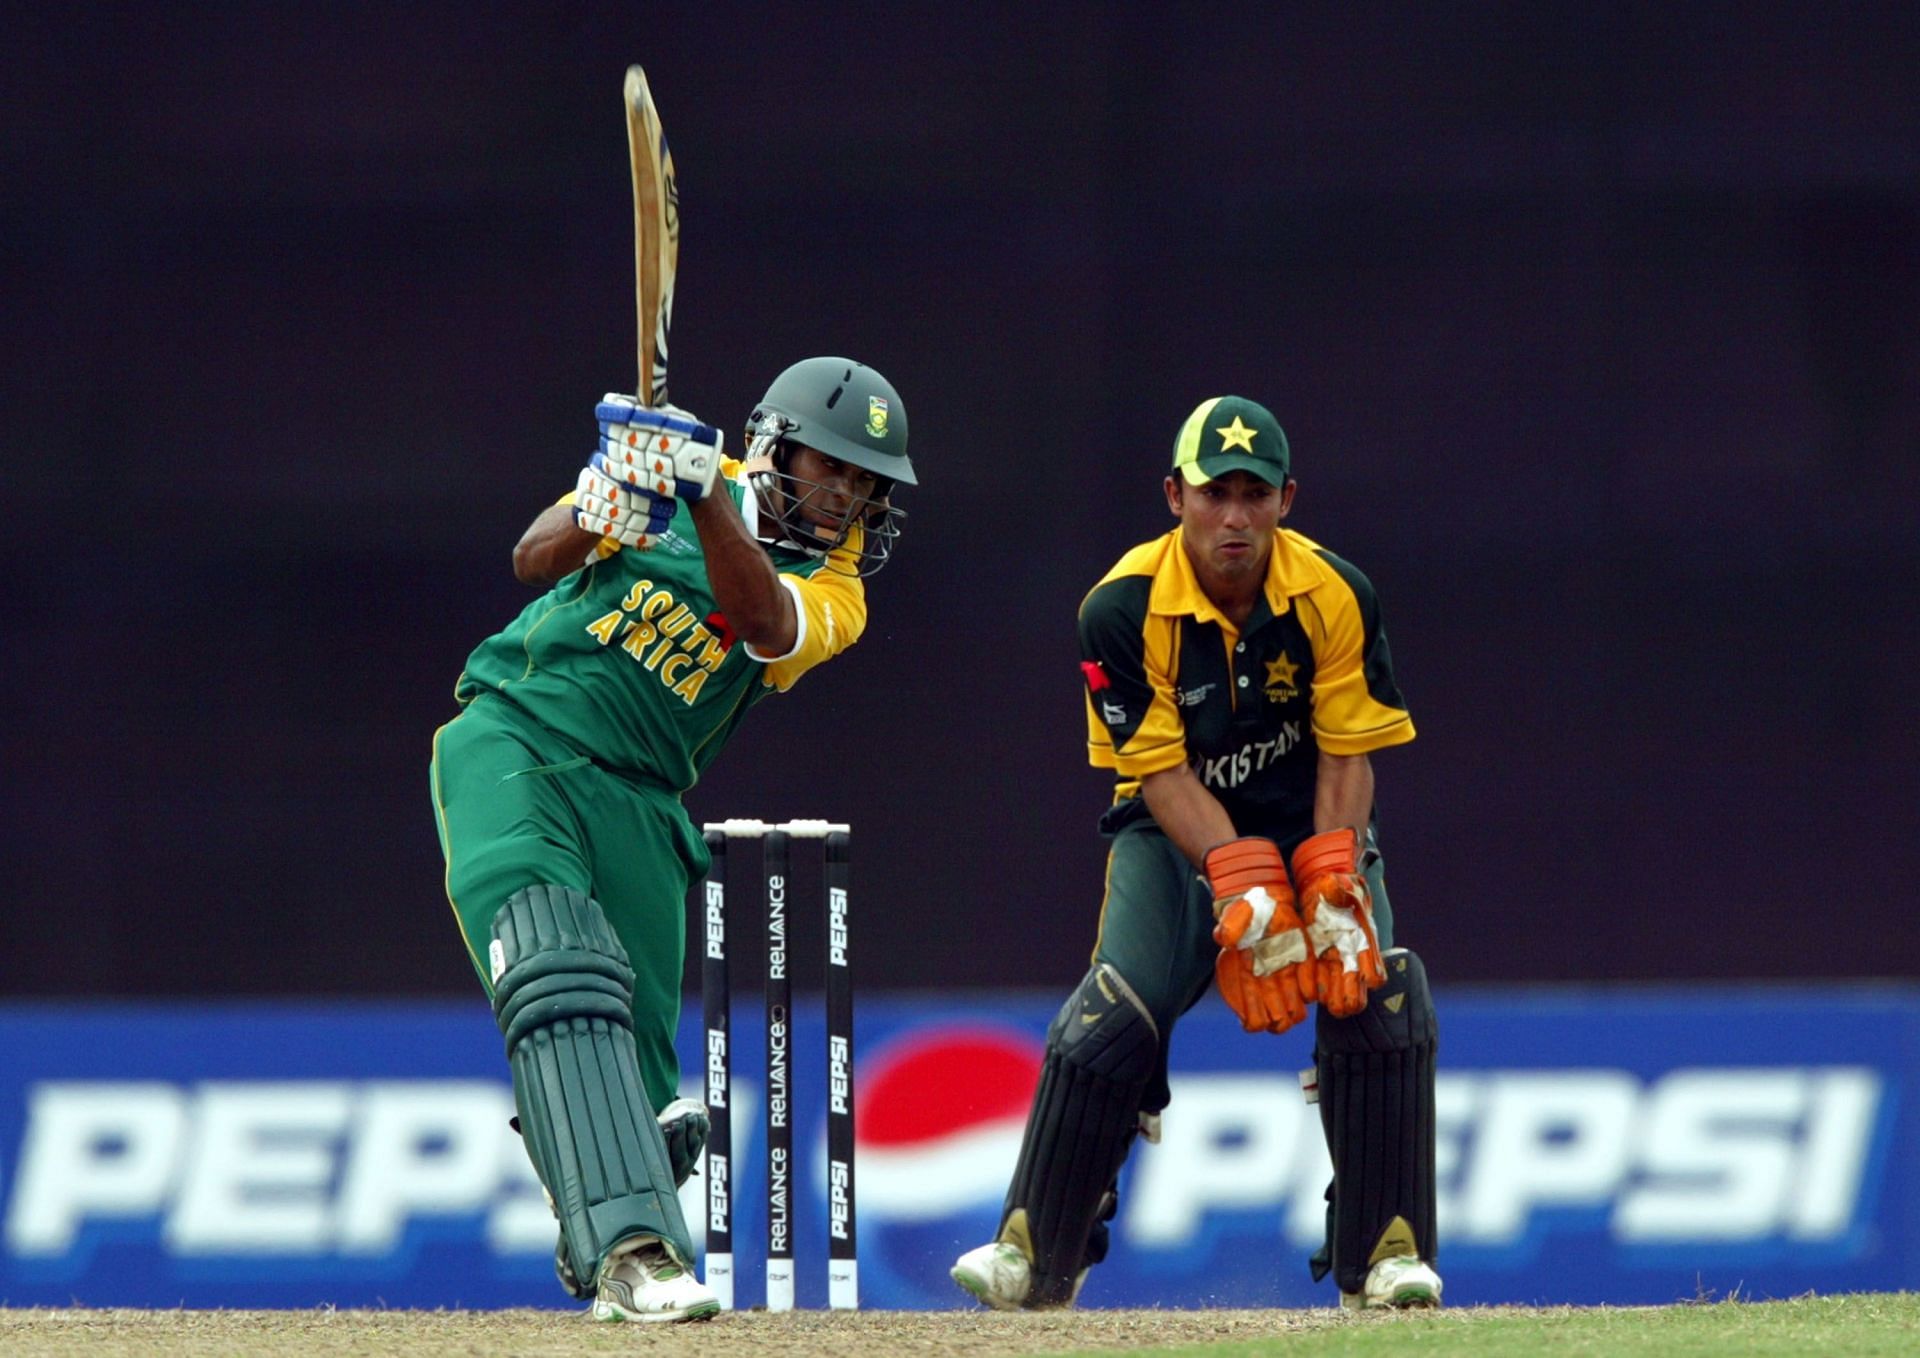 Jonathan Vandiar in action for South Africa U-19s during ICC U-19 World Cup 2008